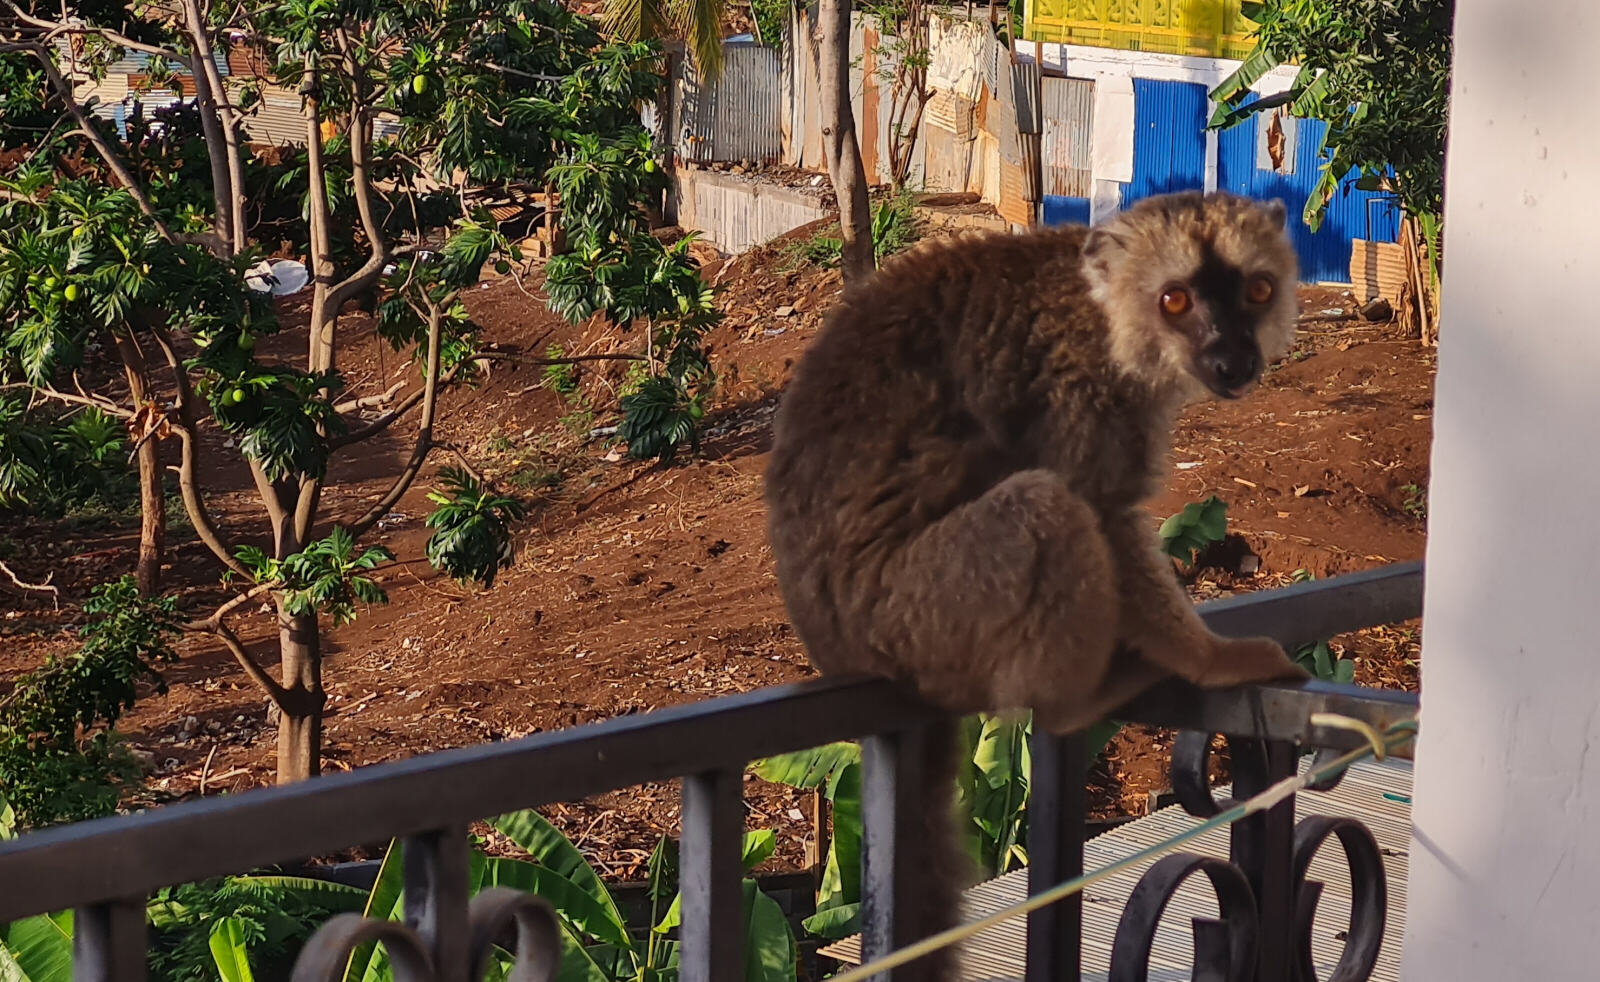 A lemur on the balcony in Mayotte